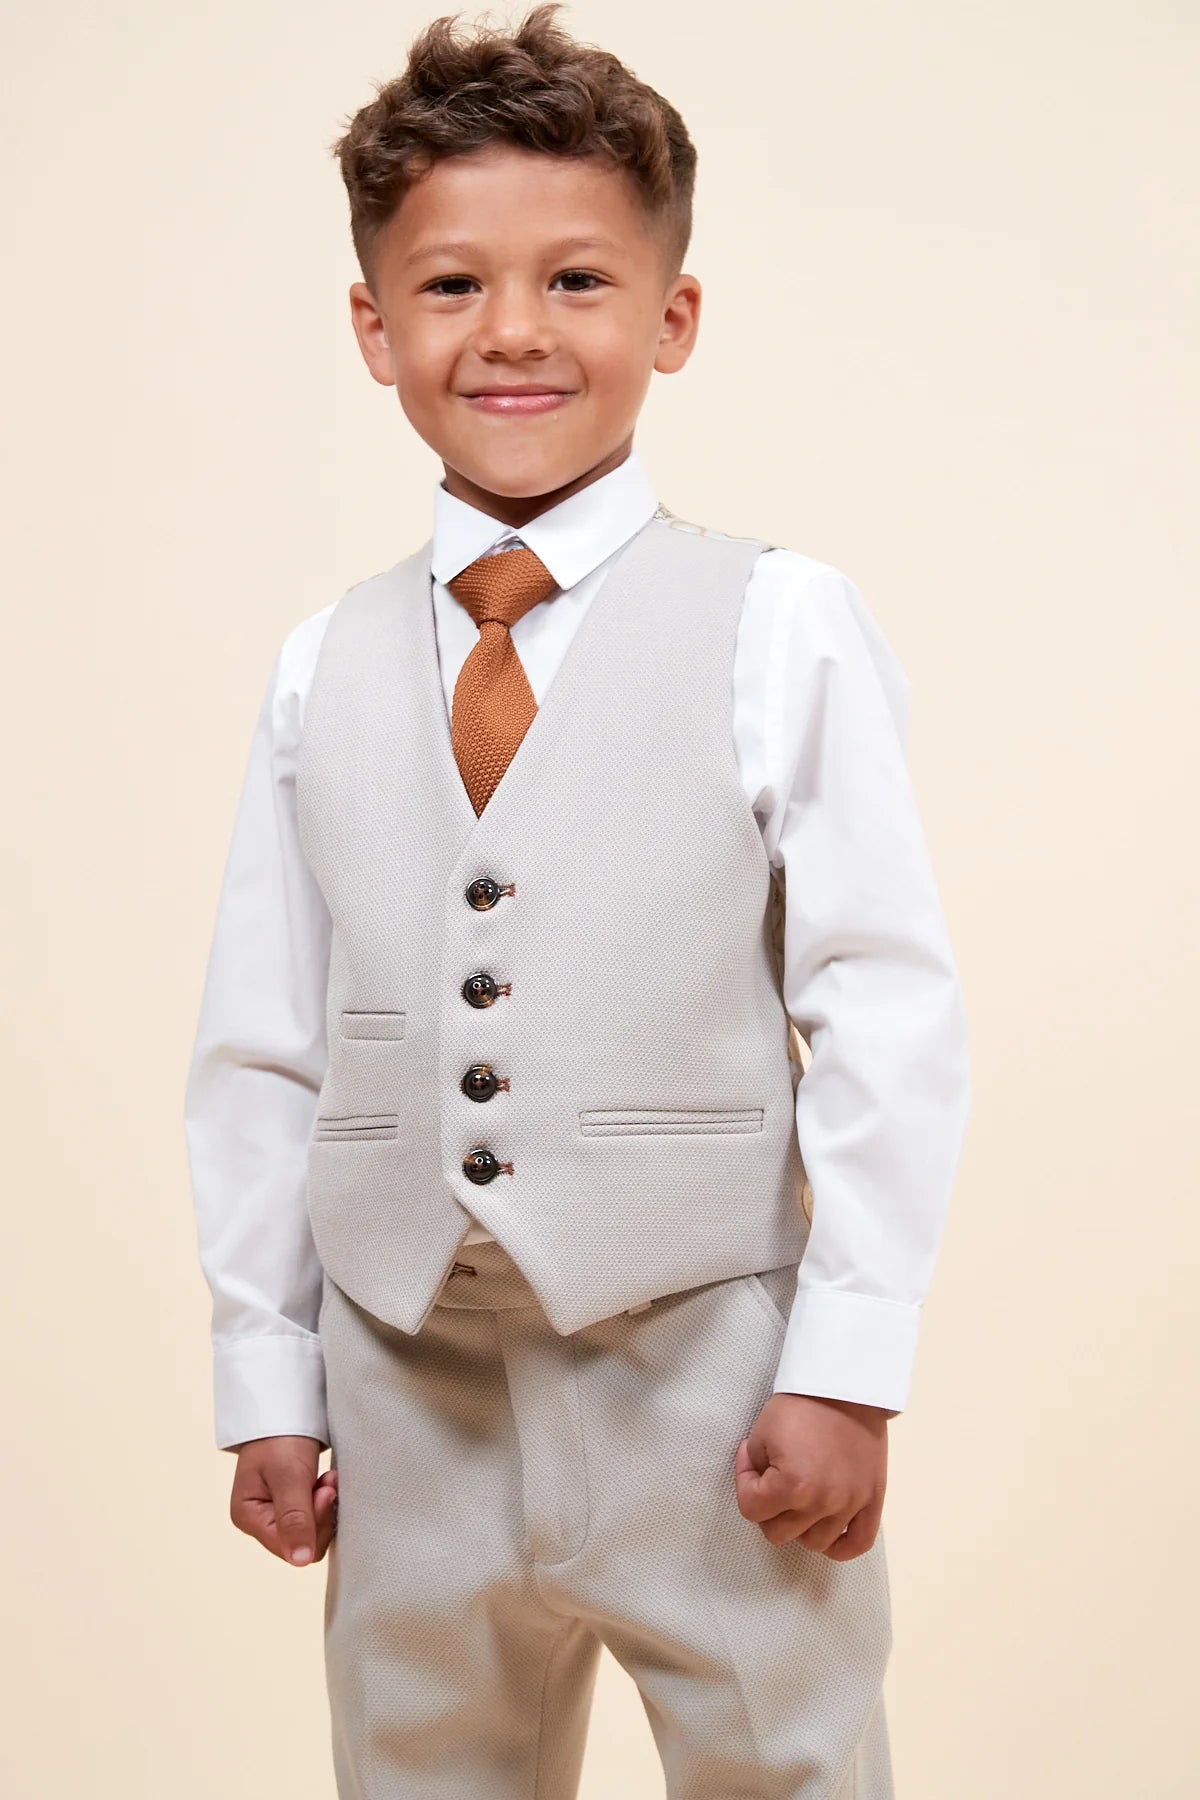 Kids Mark Darcy HM5 Stone Three Piece Suit (Matching Adult Version Available)